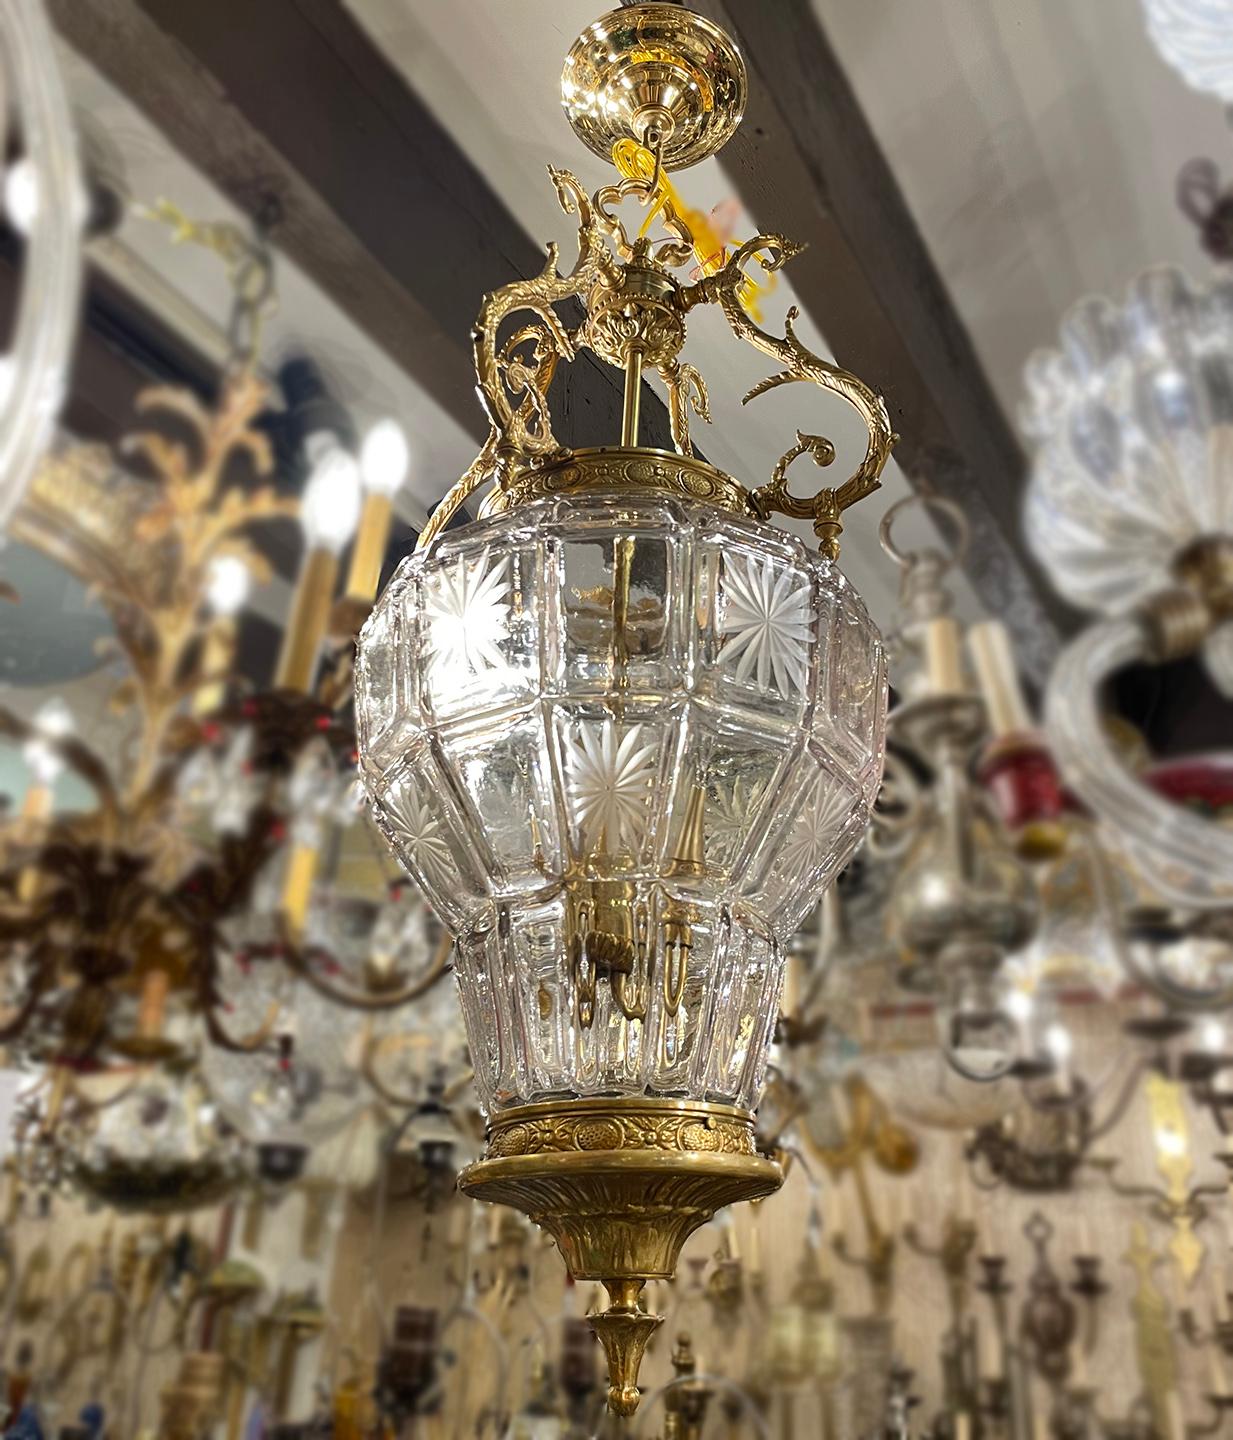 A circa 1920's French molded glass lantern with etched star details on body and three interior candelabra lights.

Measurements:
Height: 34